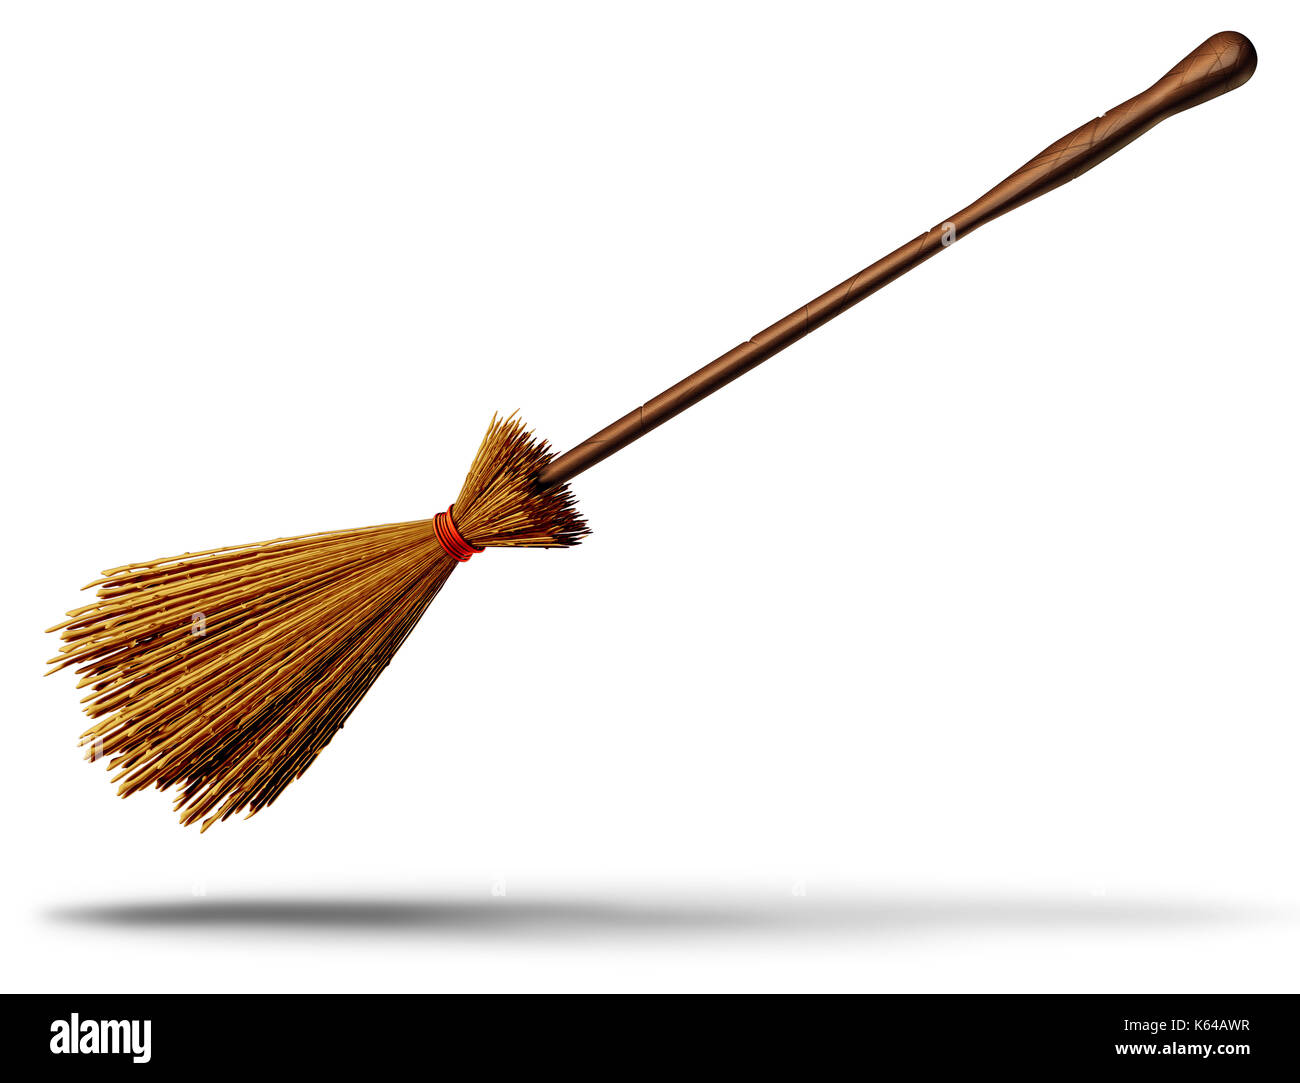 Witch broom object as an old magical besom for a wicked wizard as a halloween graphic element 3D illustration. Stock Photo